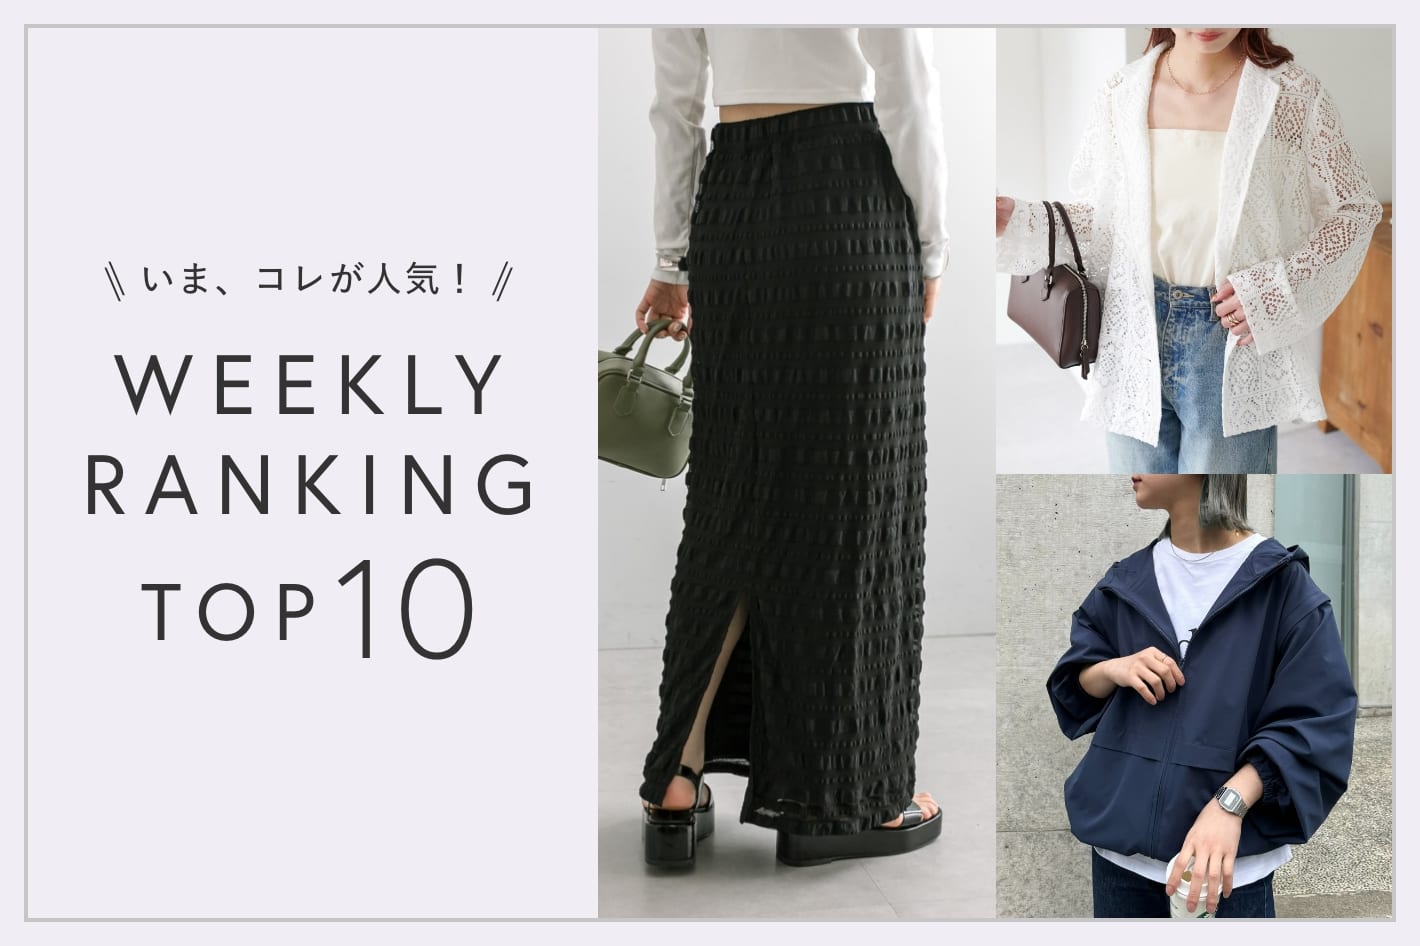 OUTLET いま、これが人気！WEEKLY RANKING TOP10！【6/3更新】